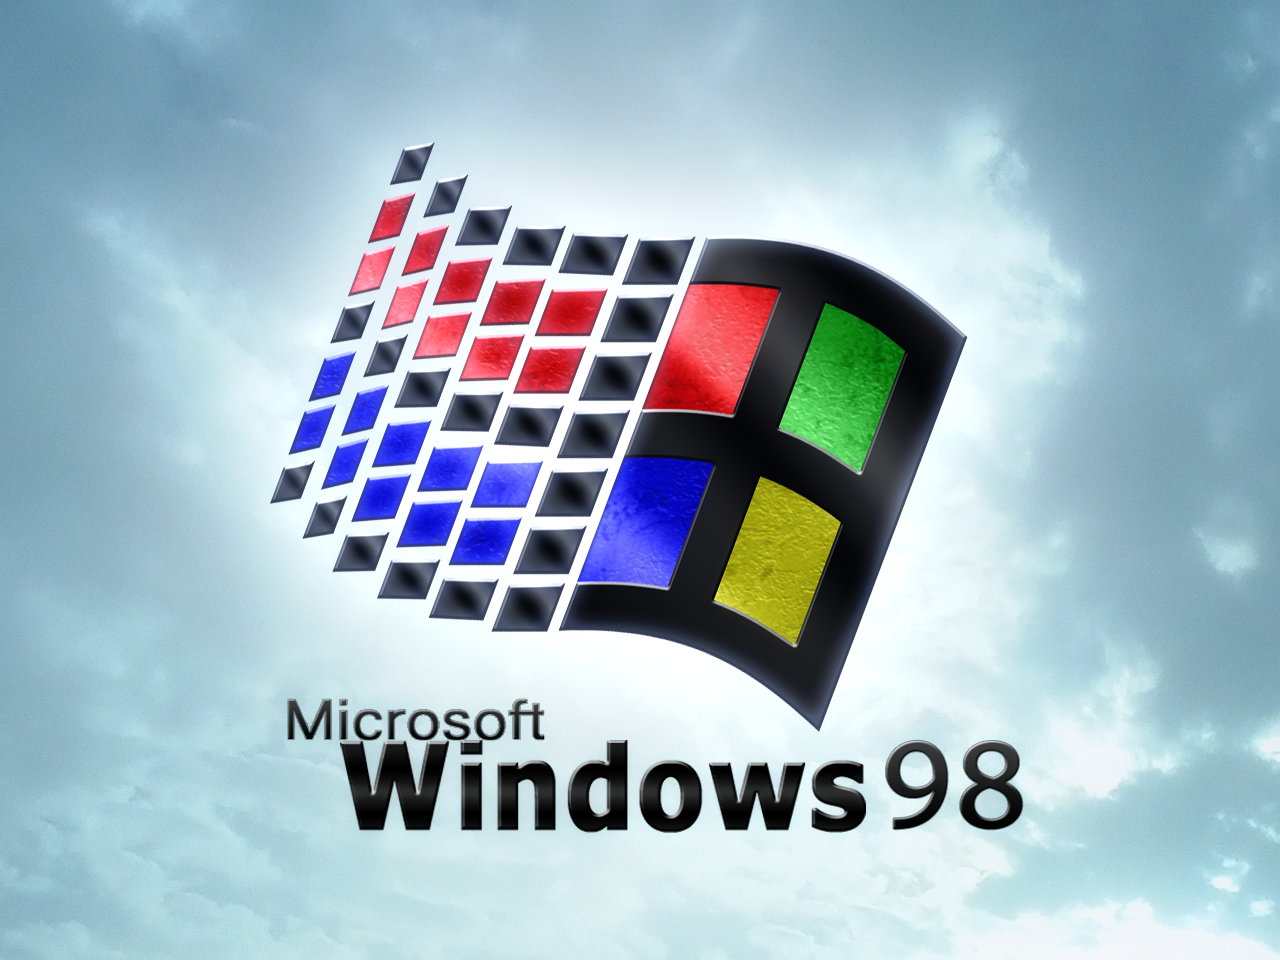 Get the nostalgia of Windows 98 with this classic look